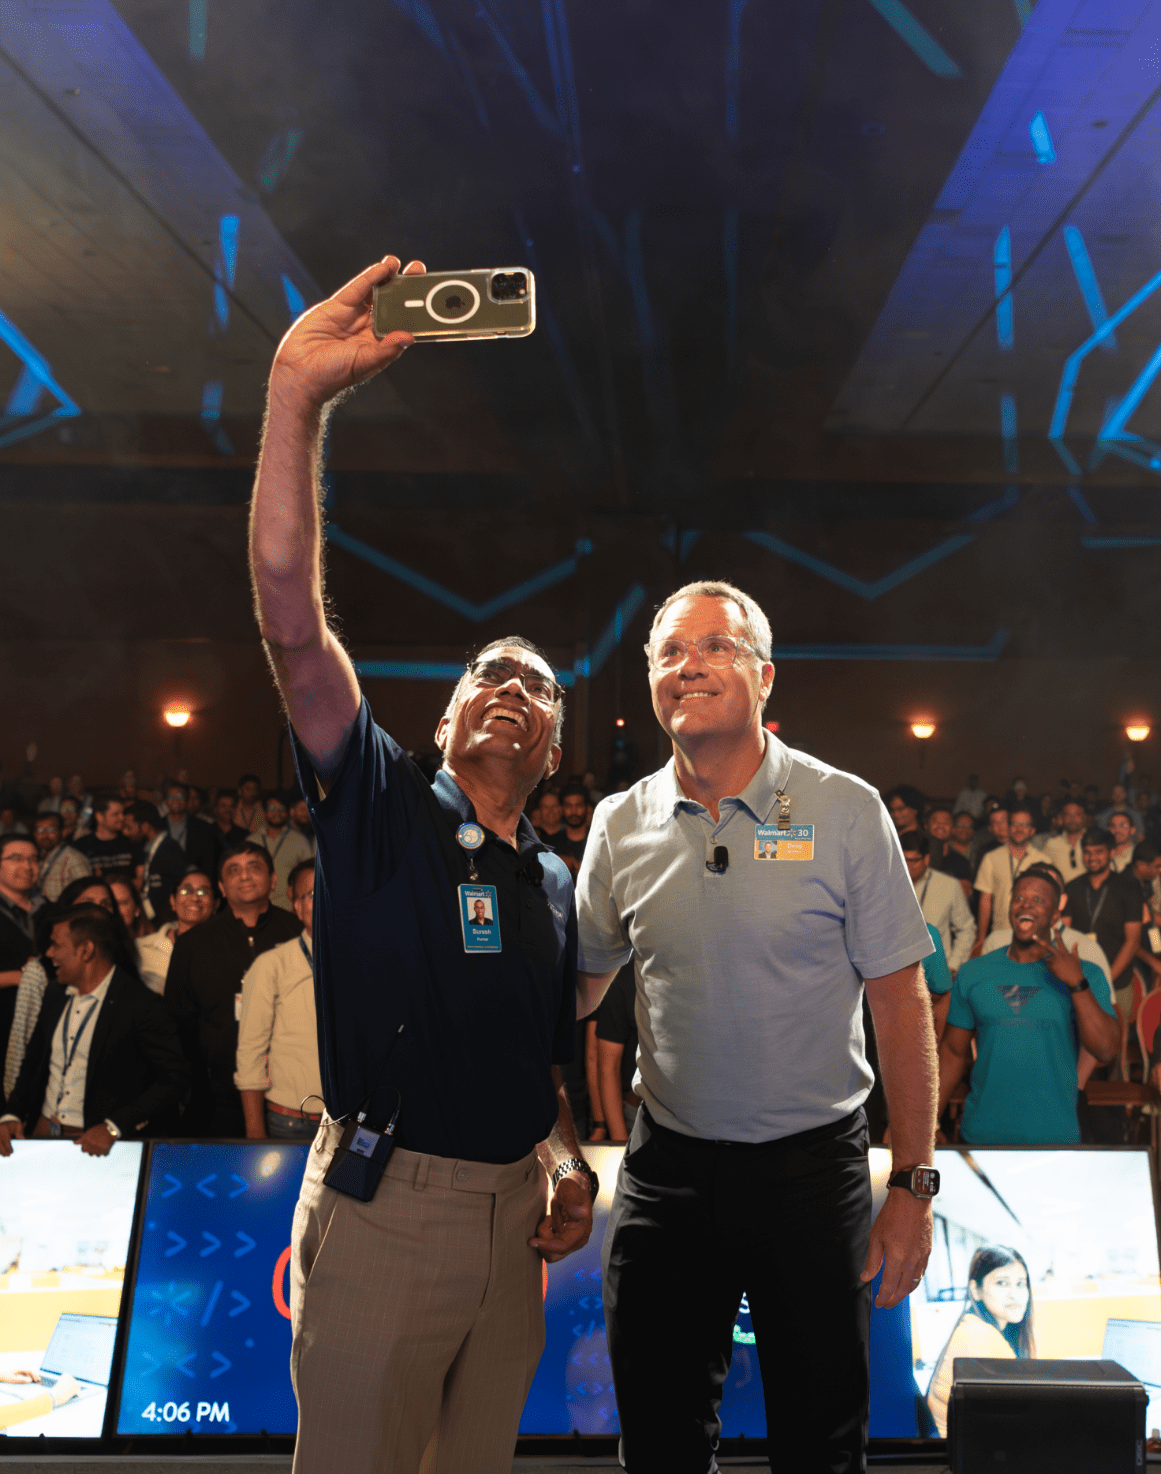 Suresh Kumar, EVP, CTO and CDO, Walmart Inc. (on the left) is shown taking a selfie with Doug McMillon, President and CEO, Walmart Inc. (on the right) with the audience in the background. 